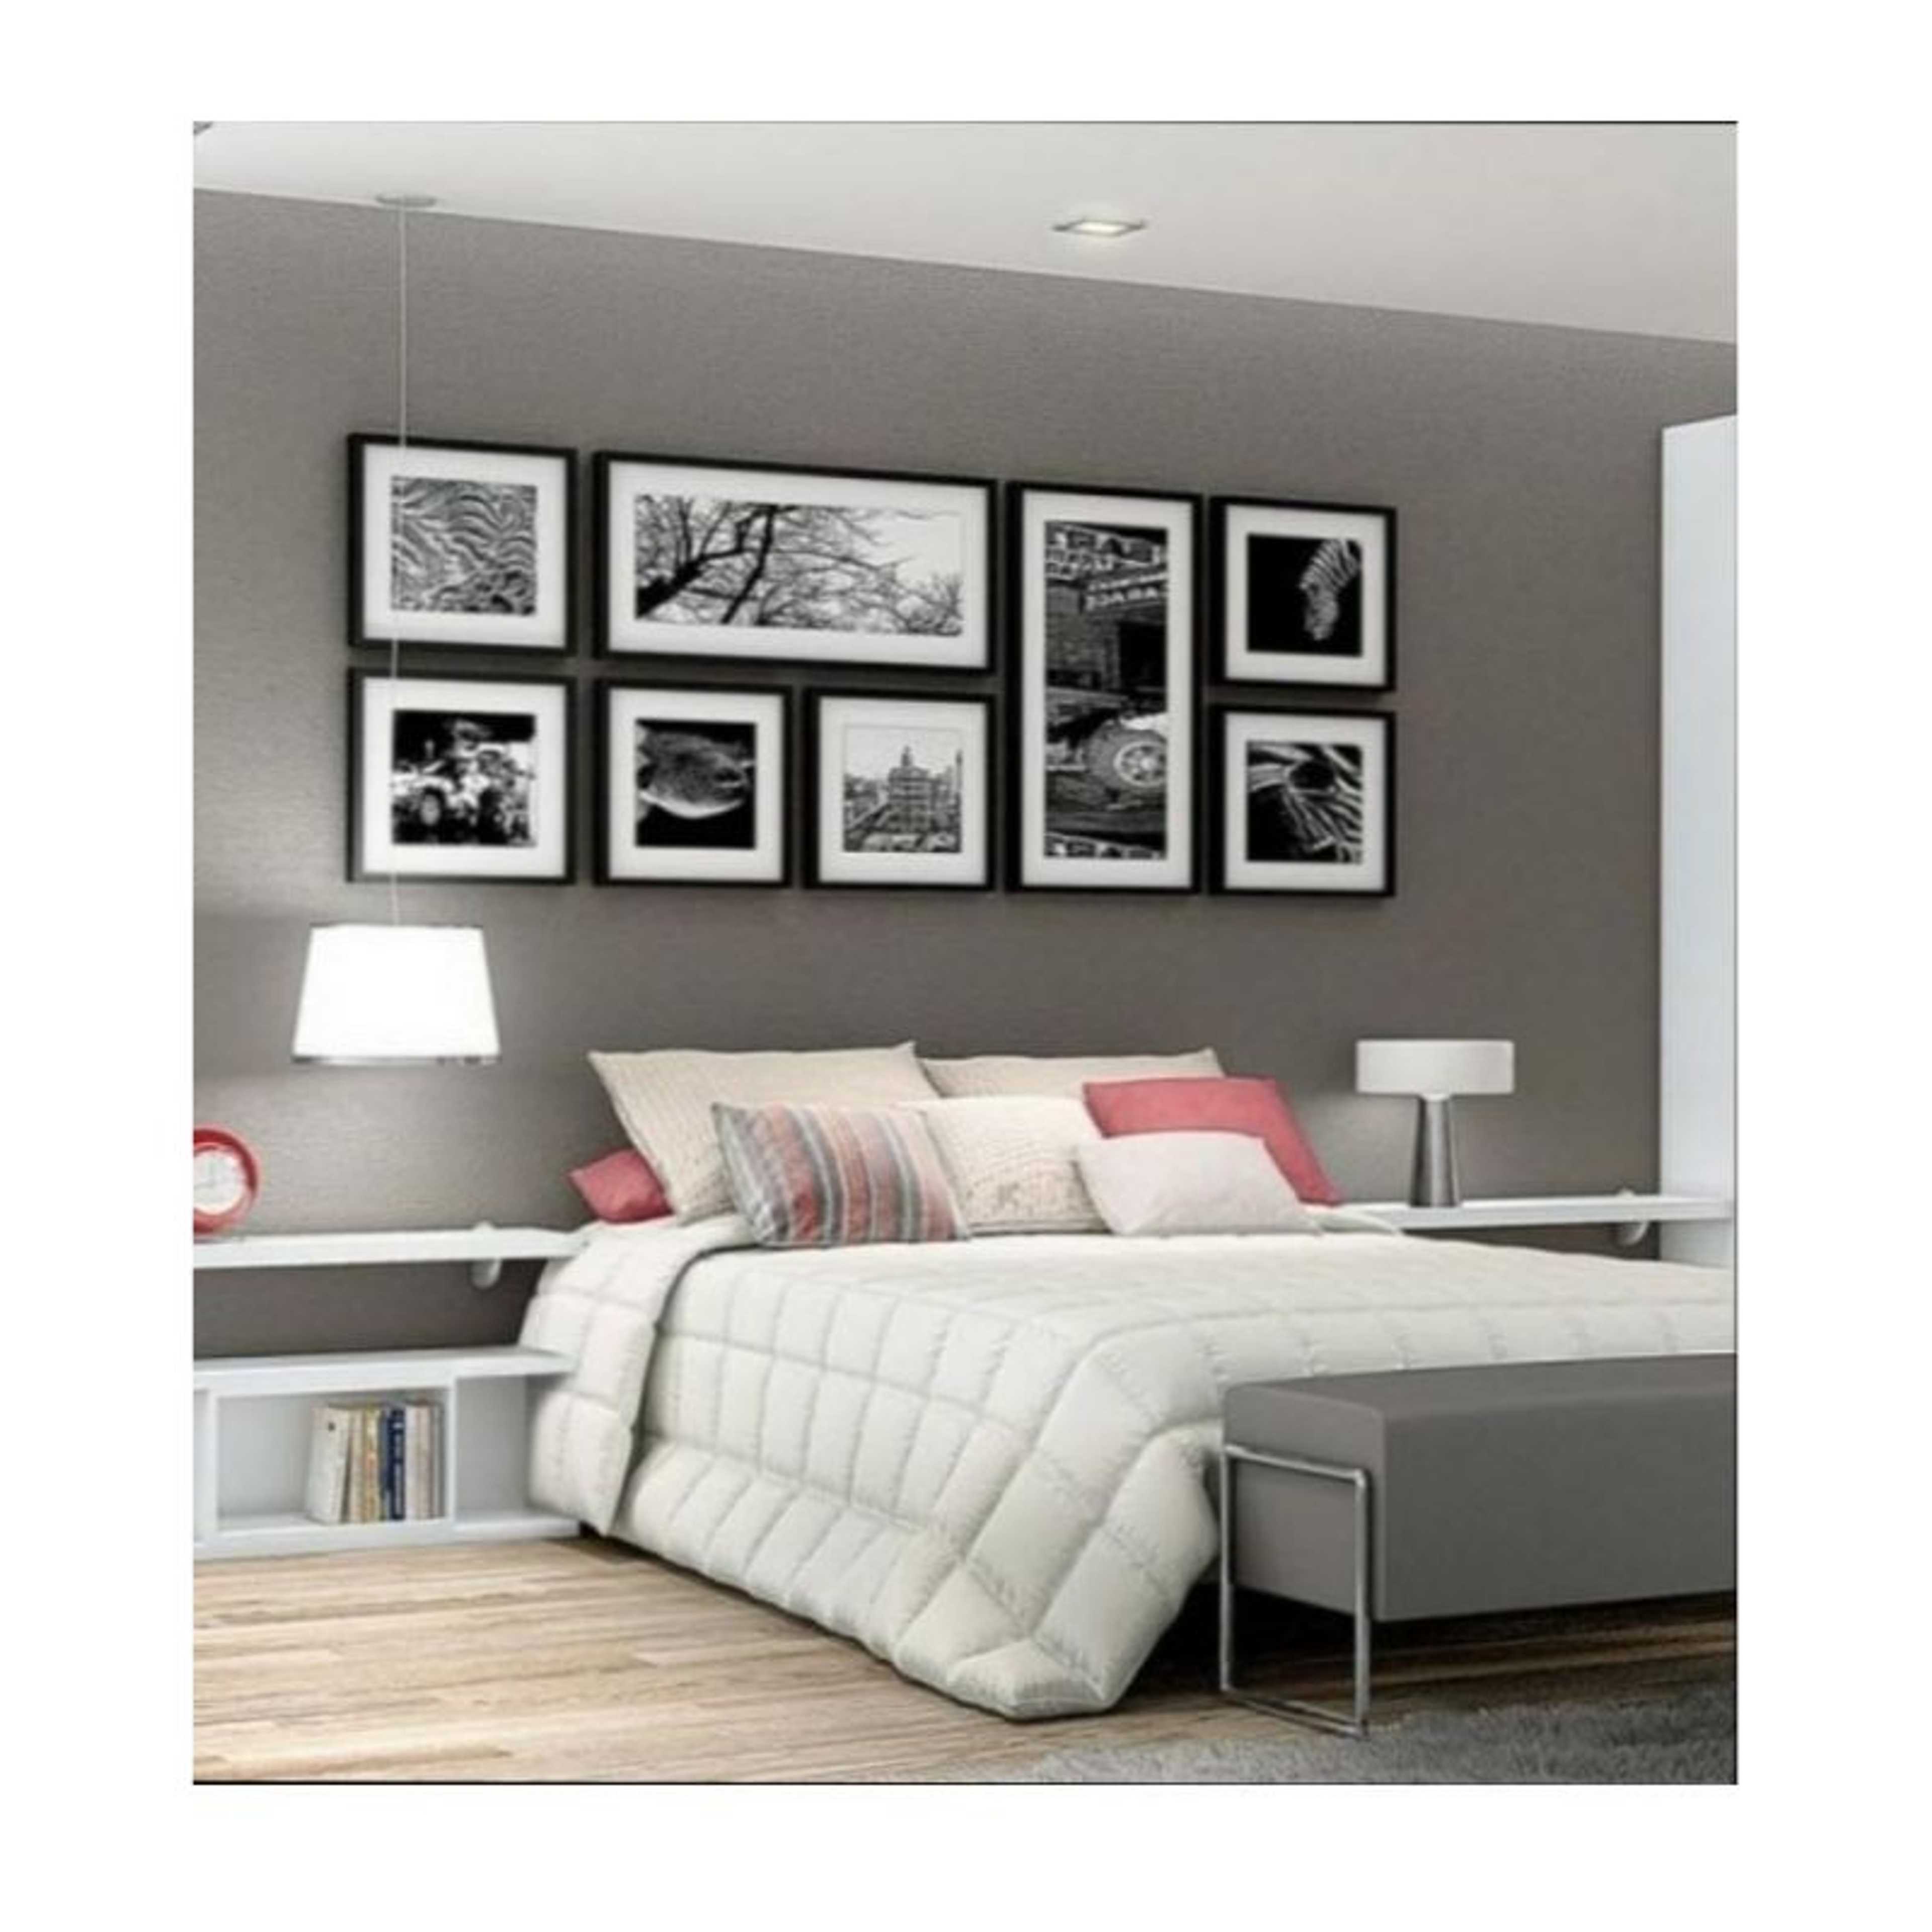 Set of 8 - Photo Frames Collage Wall Hanging Wall Decor Set